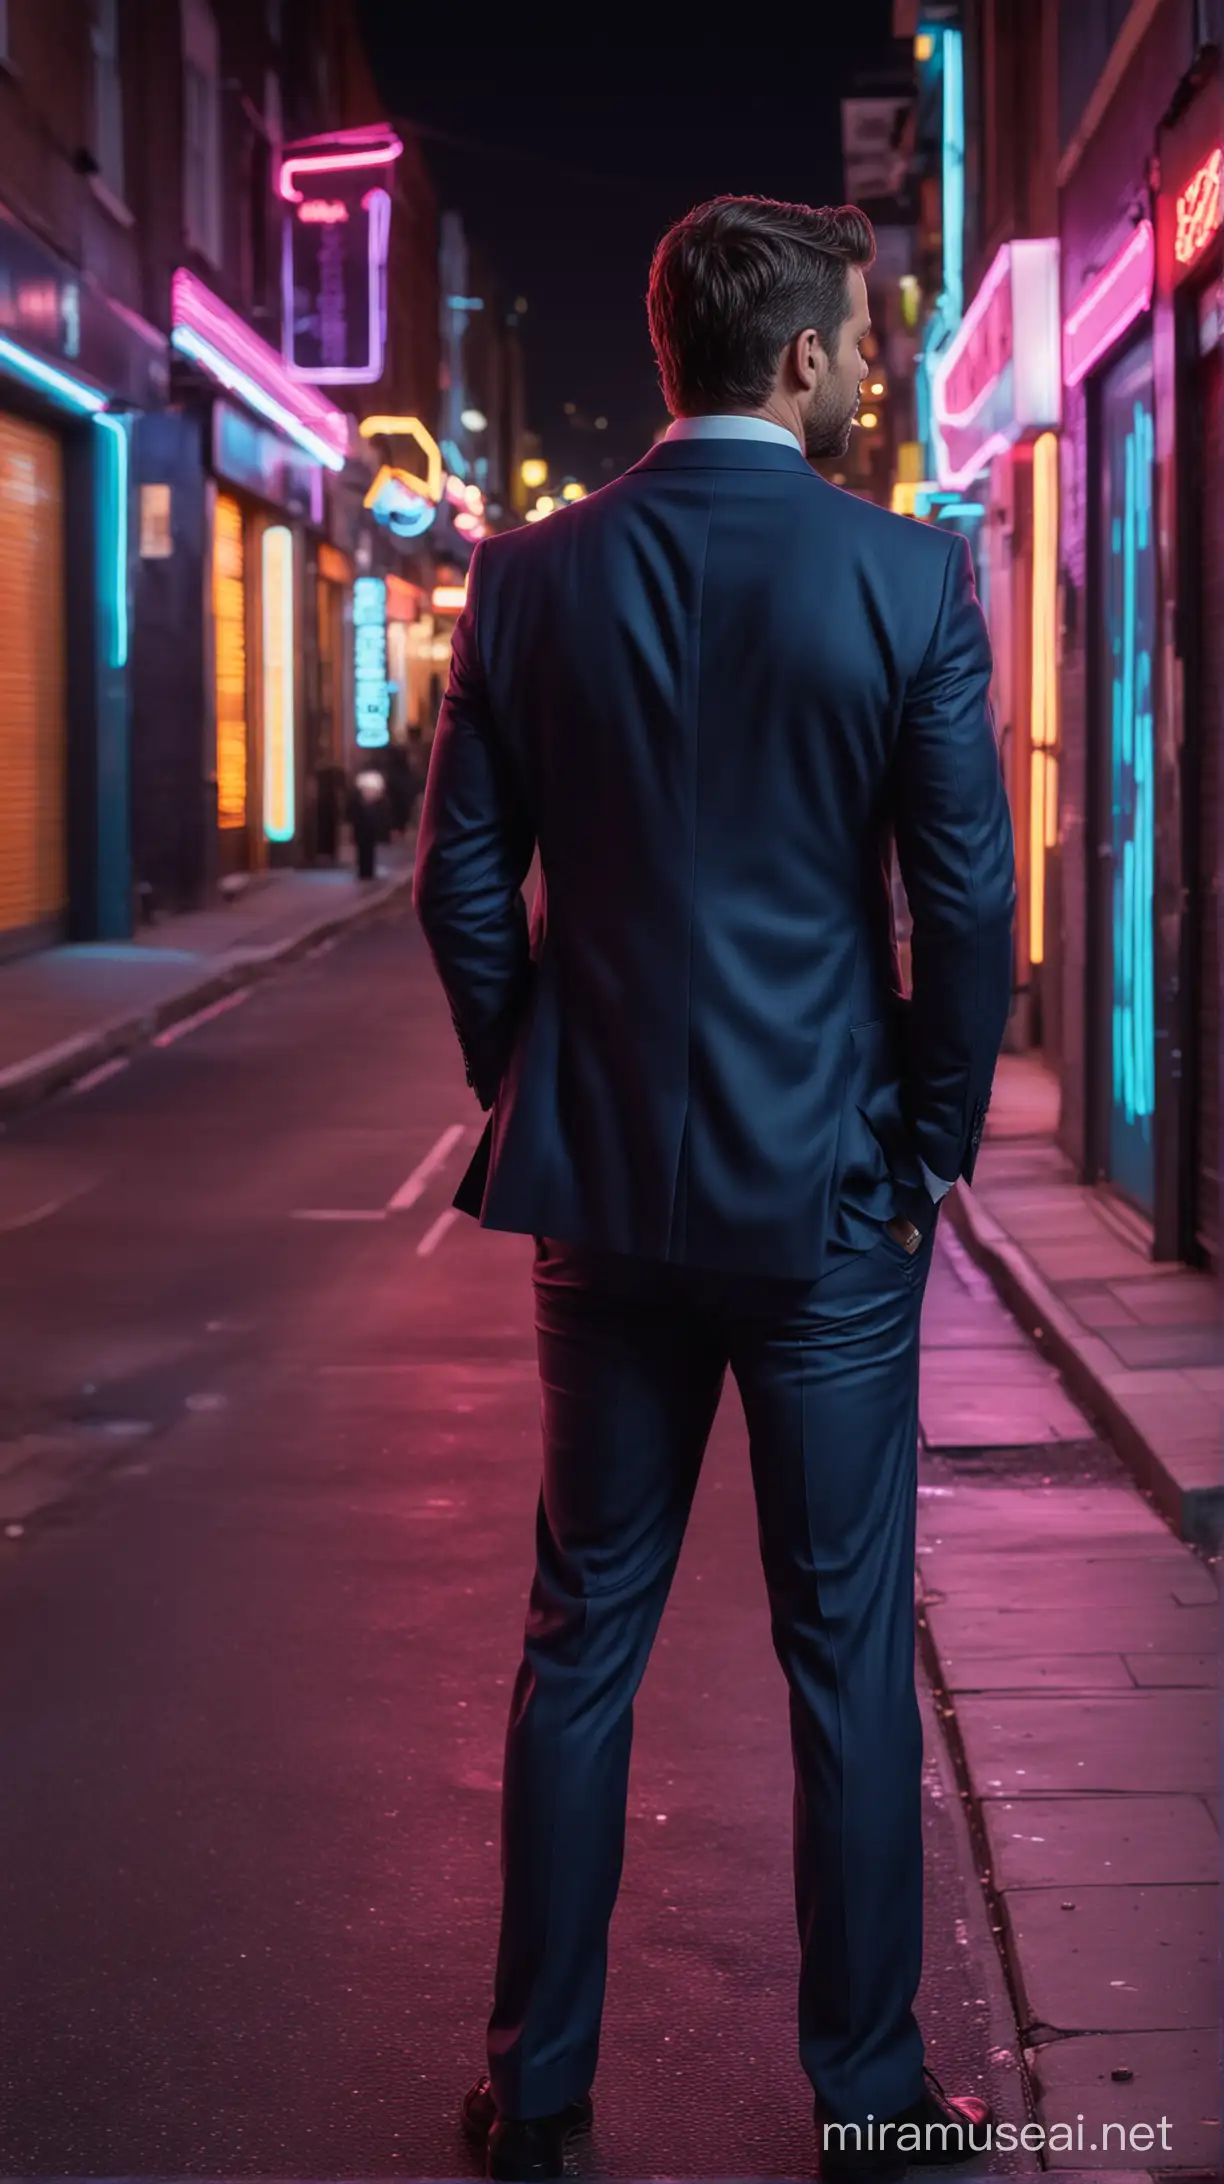 A realistic image of a hot, handsome, thirty year old man wearing a suit, standing in a street with colourful neons at night, with his back to the camera.